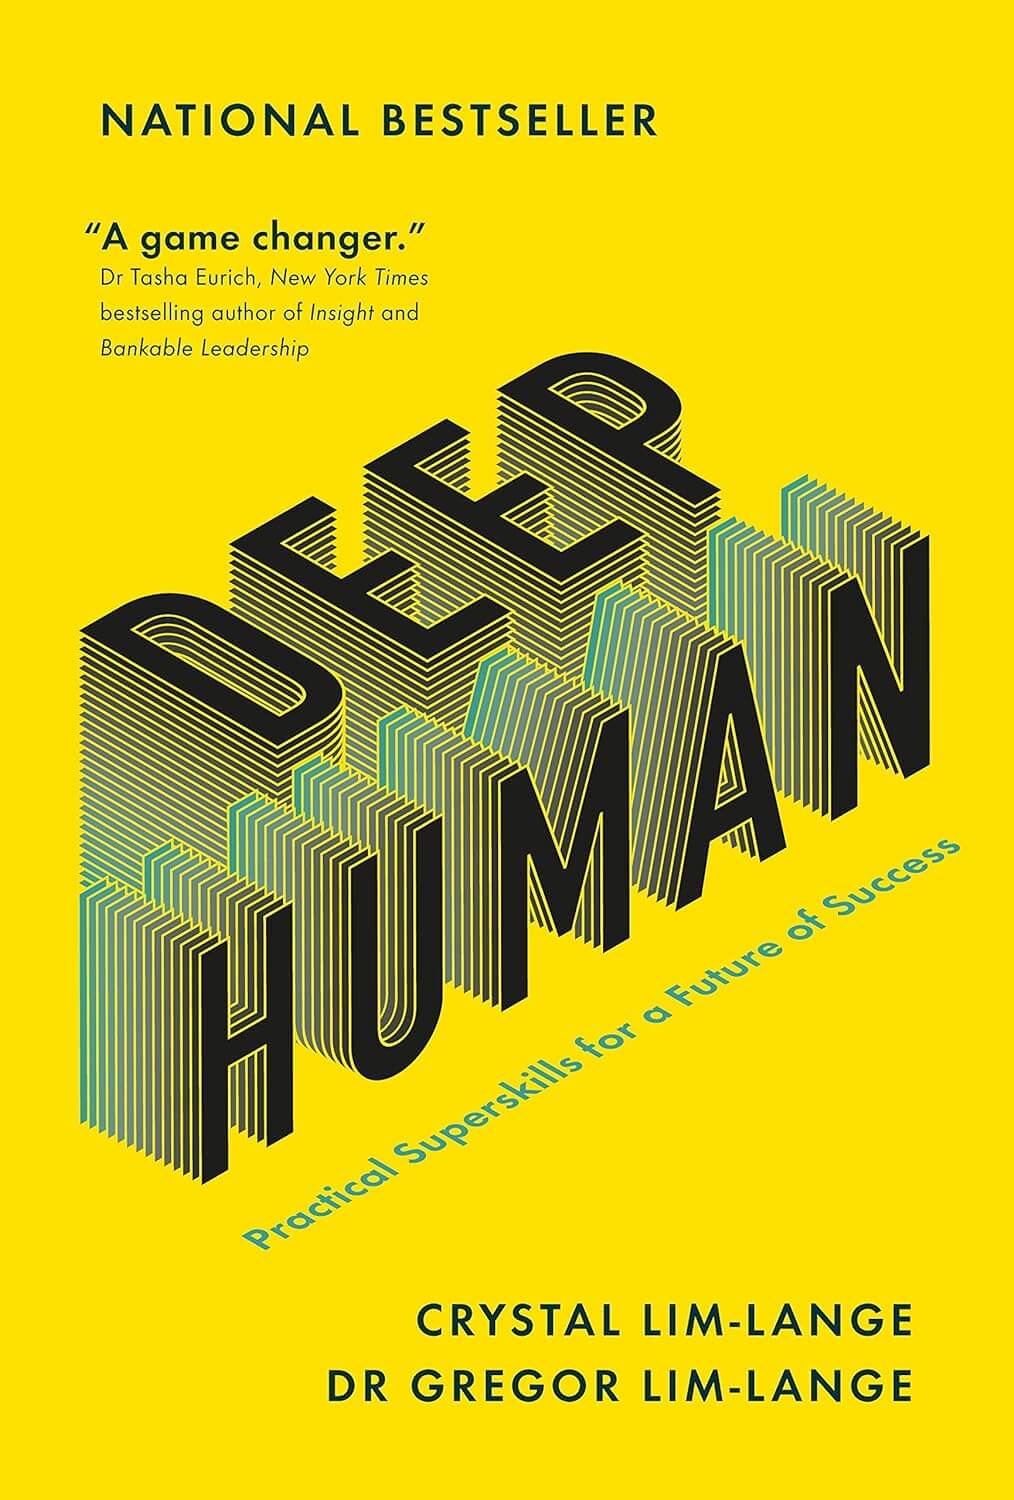 Deep Human – Practical Superskills for the future